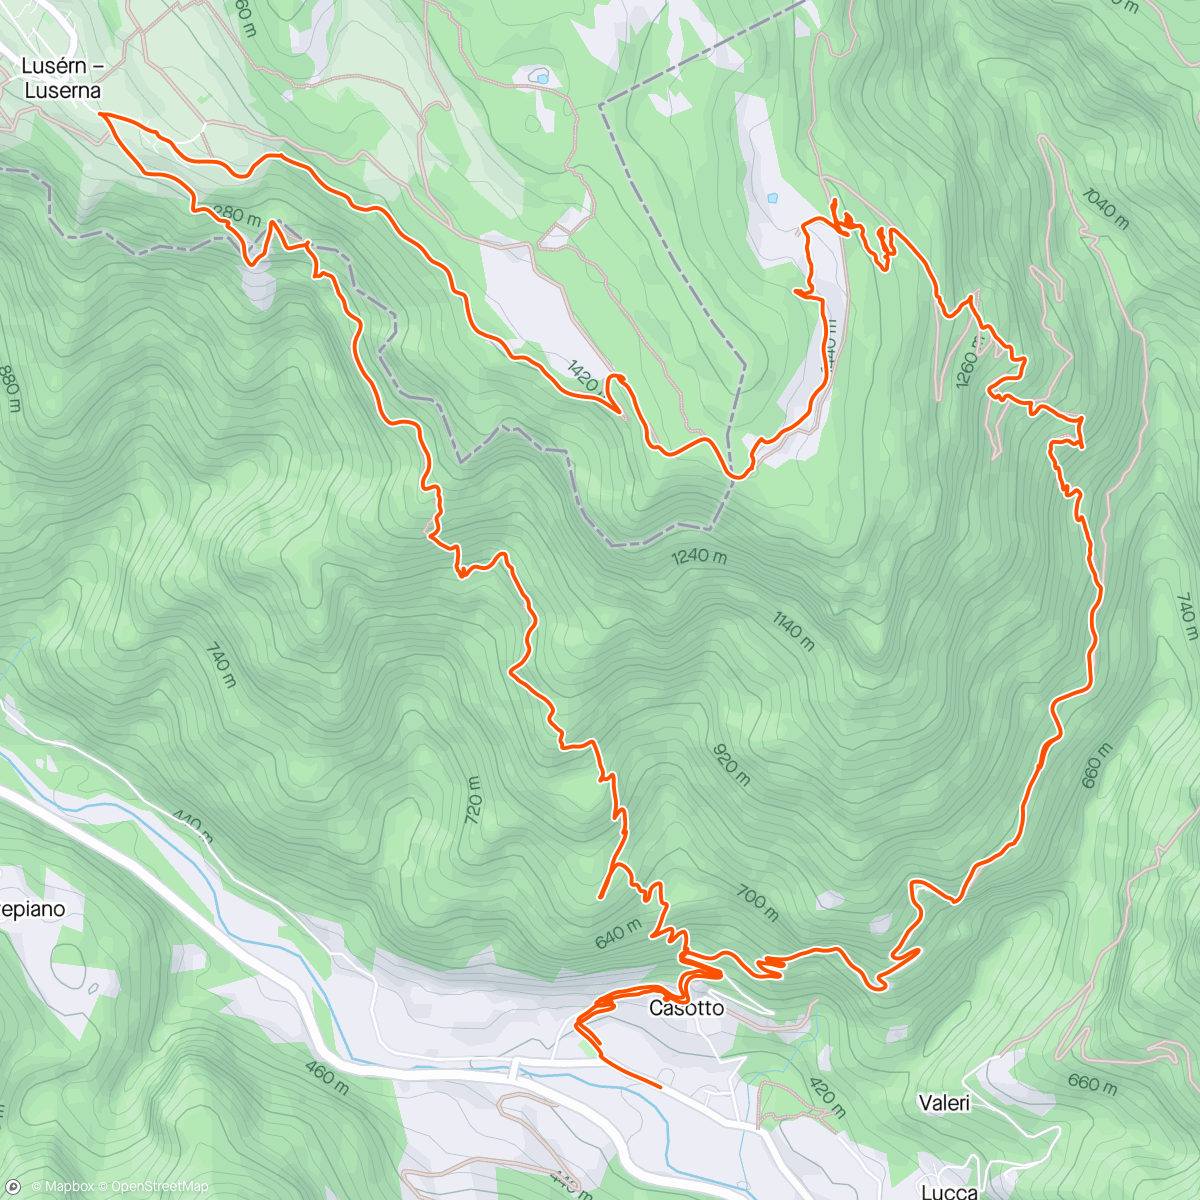 Map of the activity, Casotto - Luserna